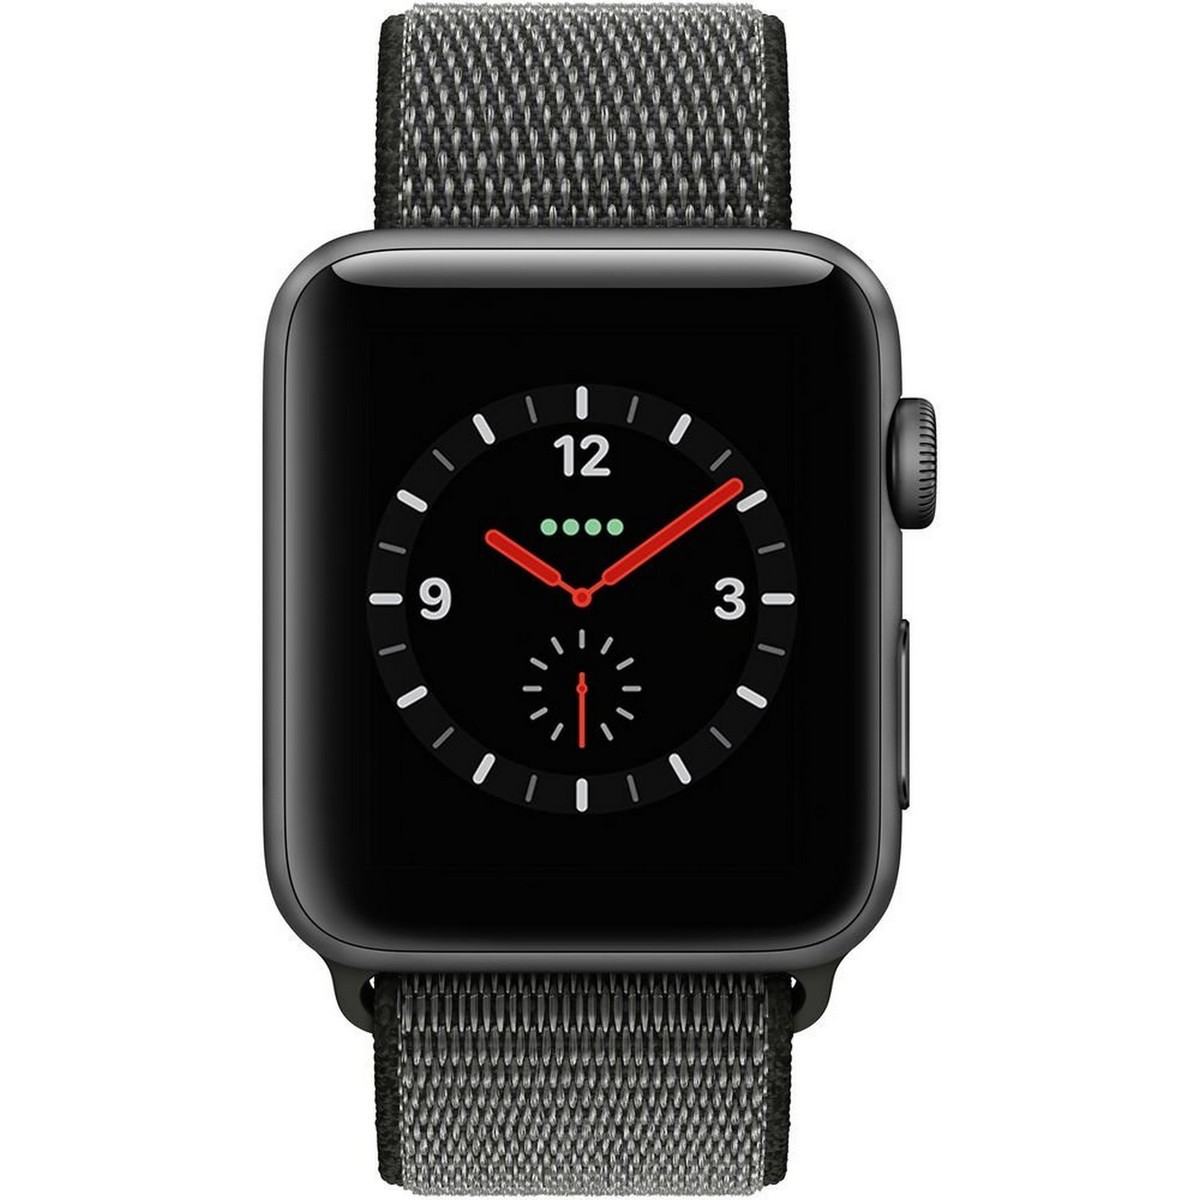 Apple Watch Series 3 (GPS + Cellular) MRQH2 Space Gray Aluminum Case with Dark Olive Sport Loop 42mm